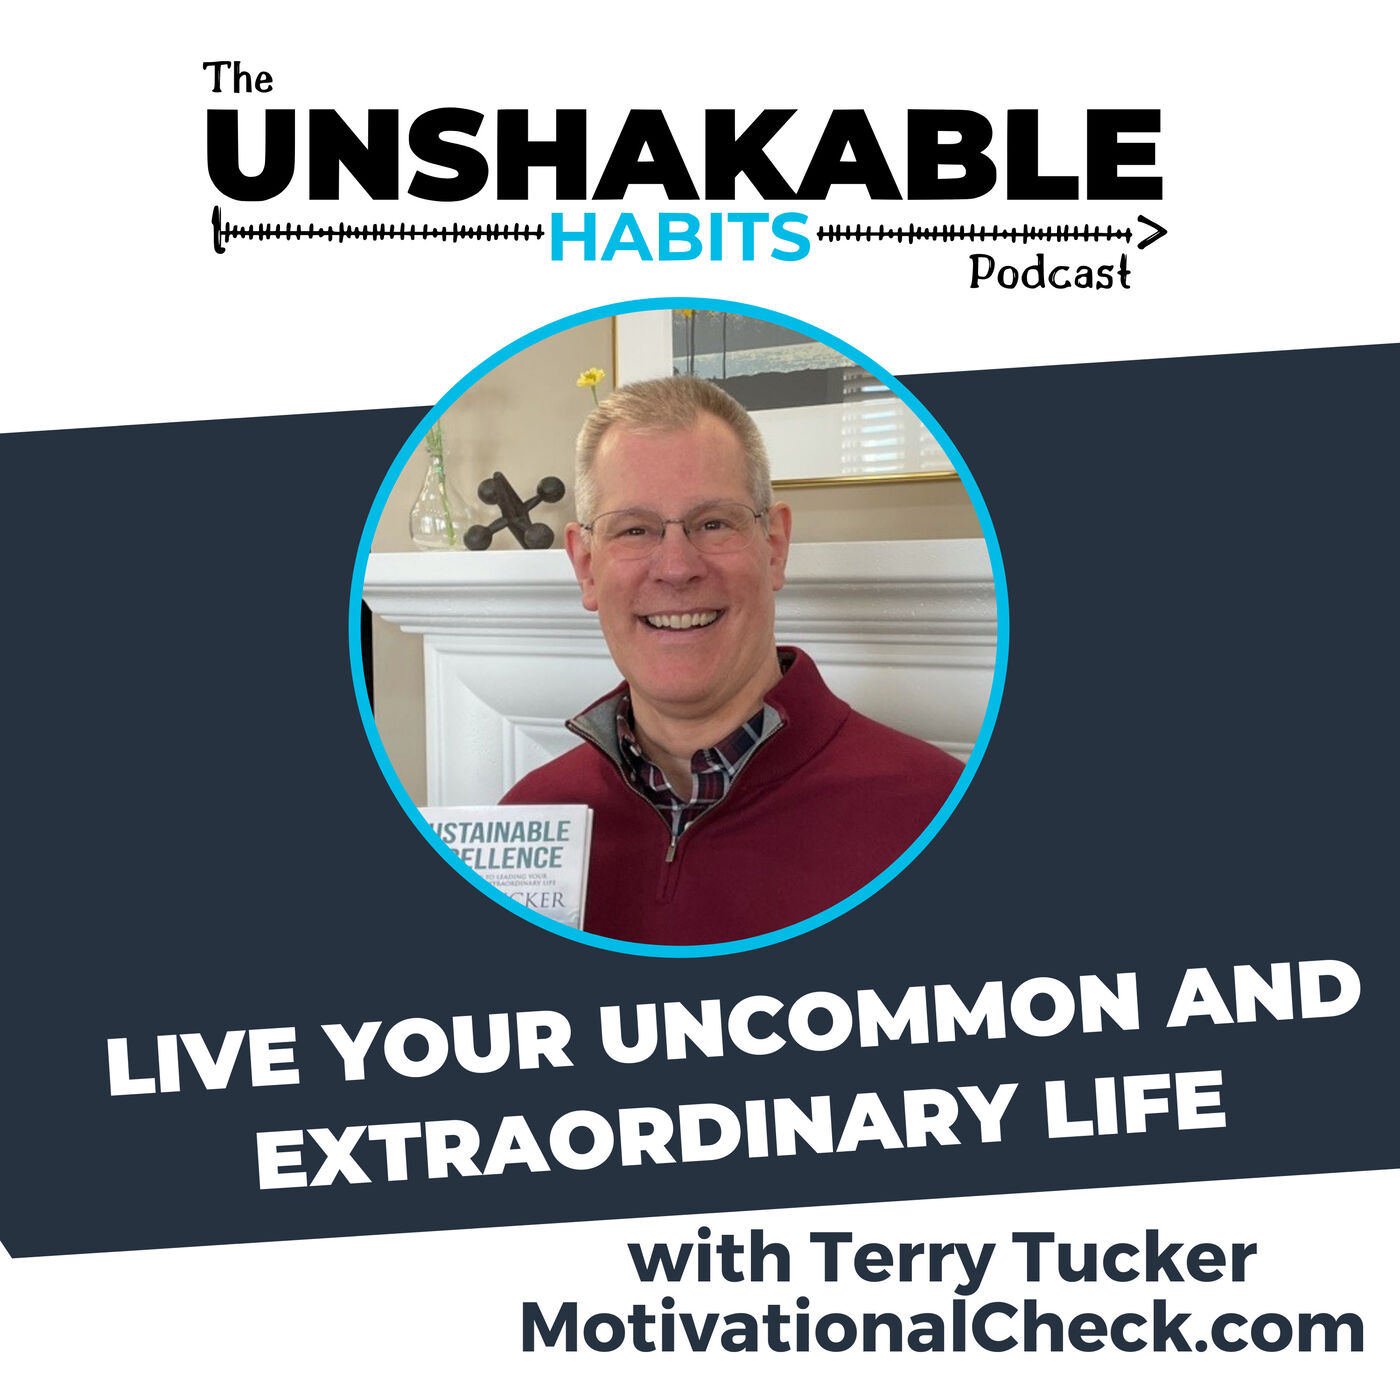 Live Your Uncommon and Extraordinary Life with Terry Tucker